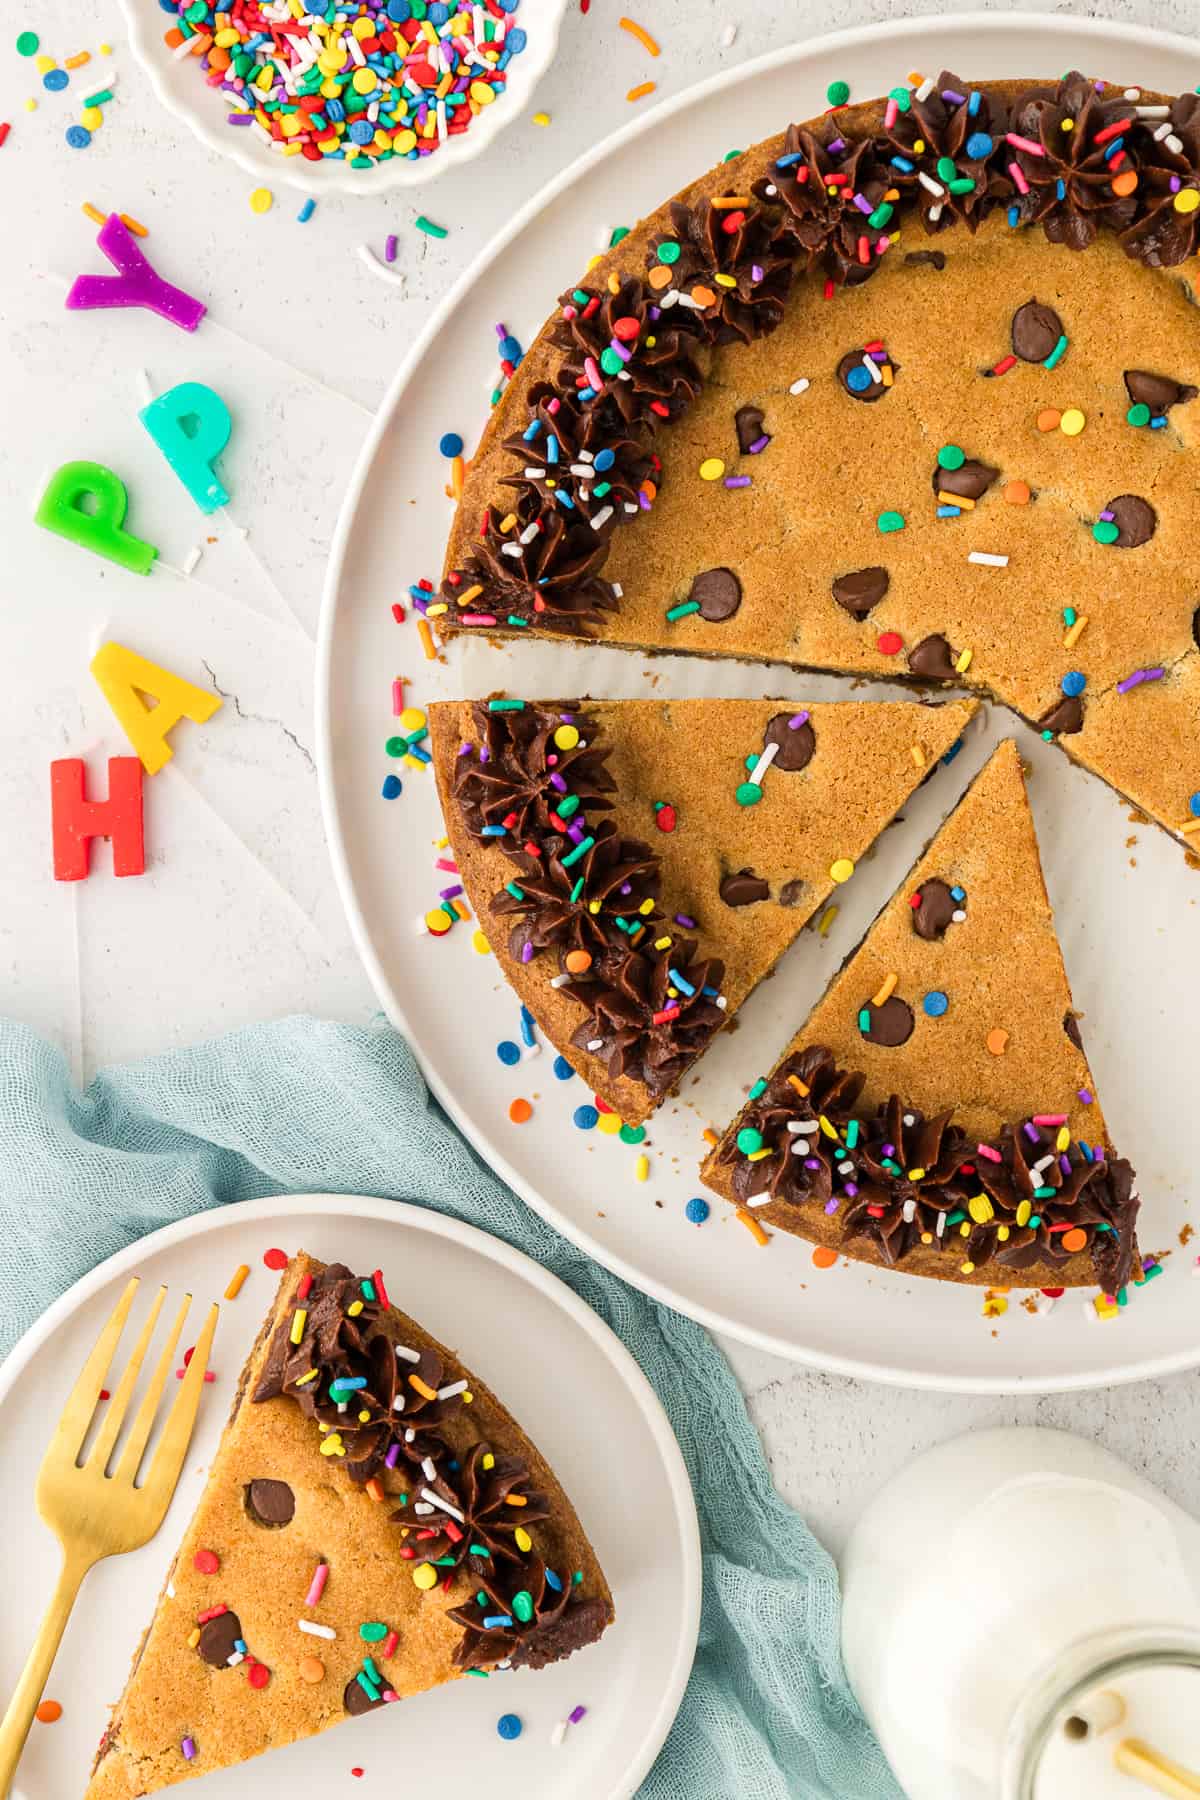 a cookie cake on a white plate with two slices cut, another slice on a smaller white plate with a form and happy birthday candles and a bowl of sprinkles beside it